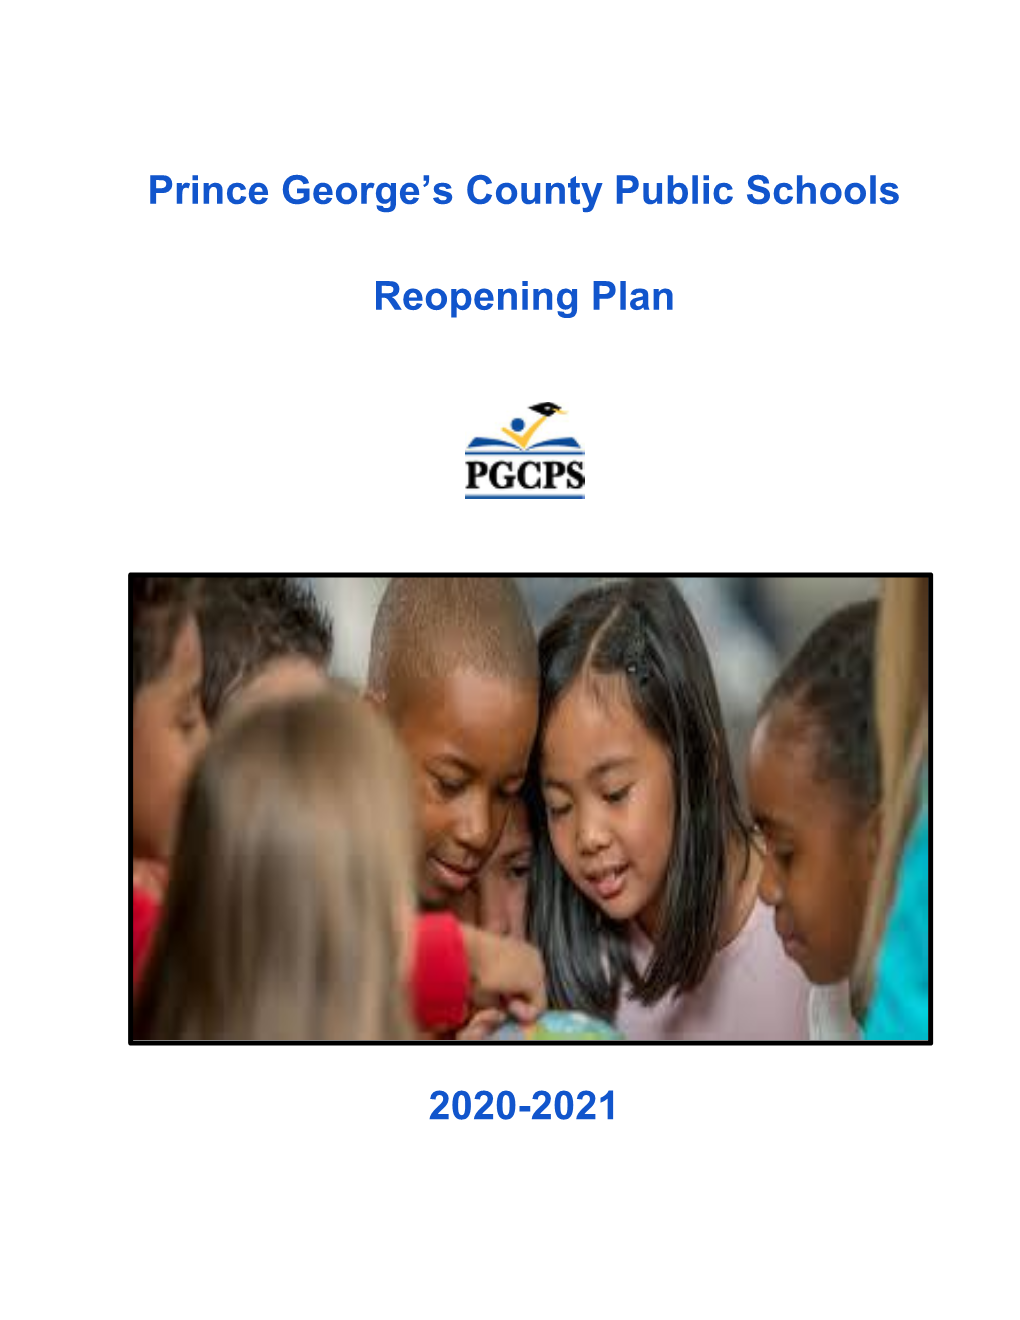 Prince George's County Public Schools Reopening Plan 2020-2021